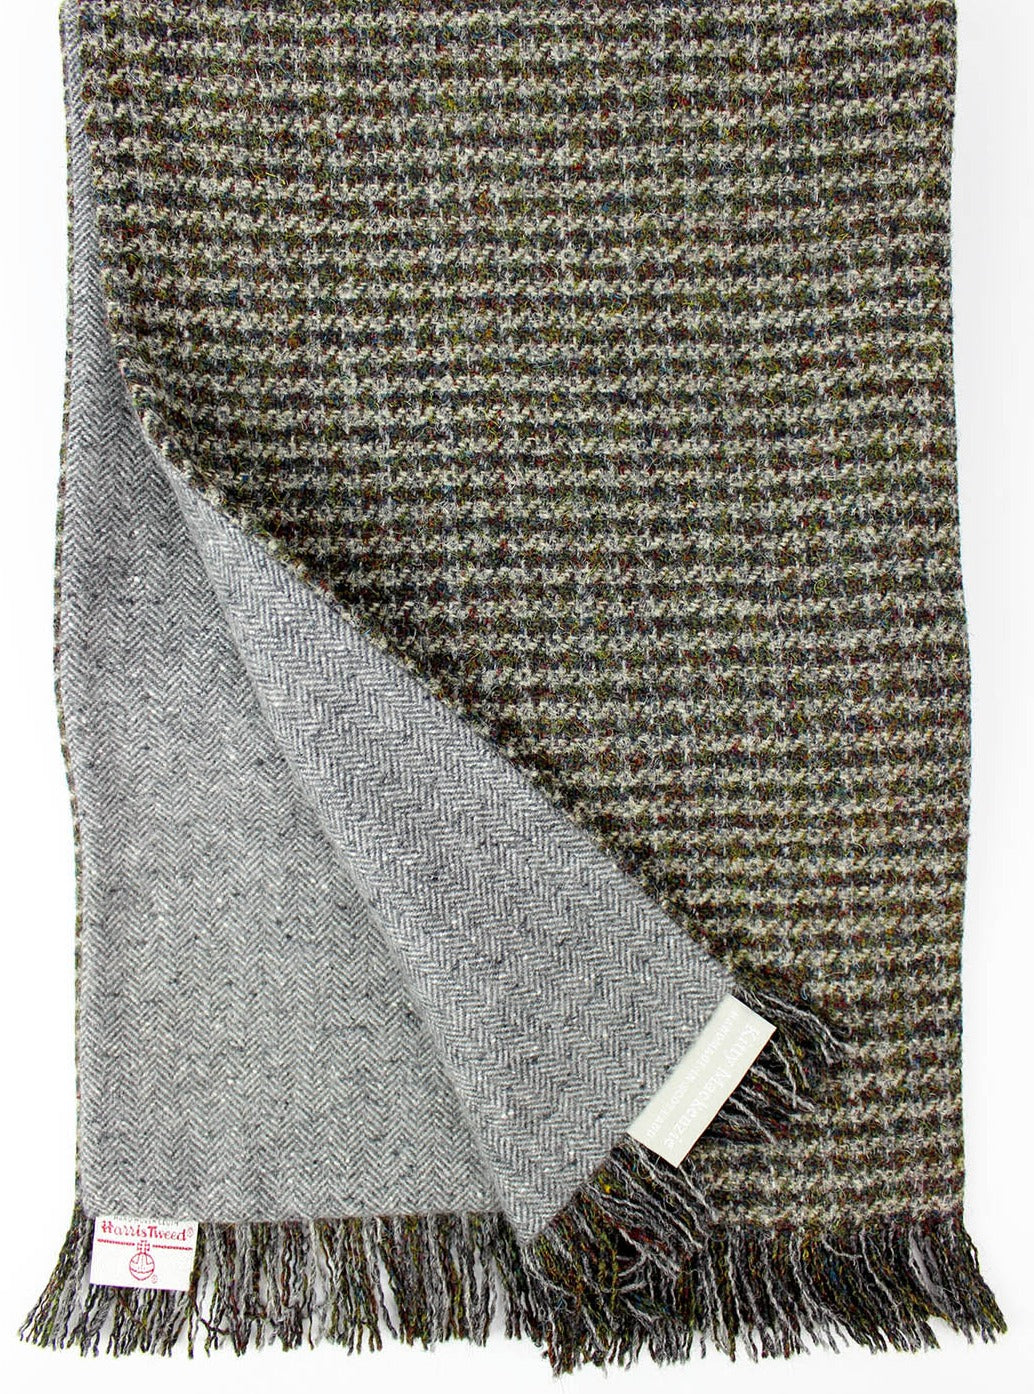 Scottish Textile Showcase Lusken scarf made with Harris Tweed and cashmere lining and pin fringe